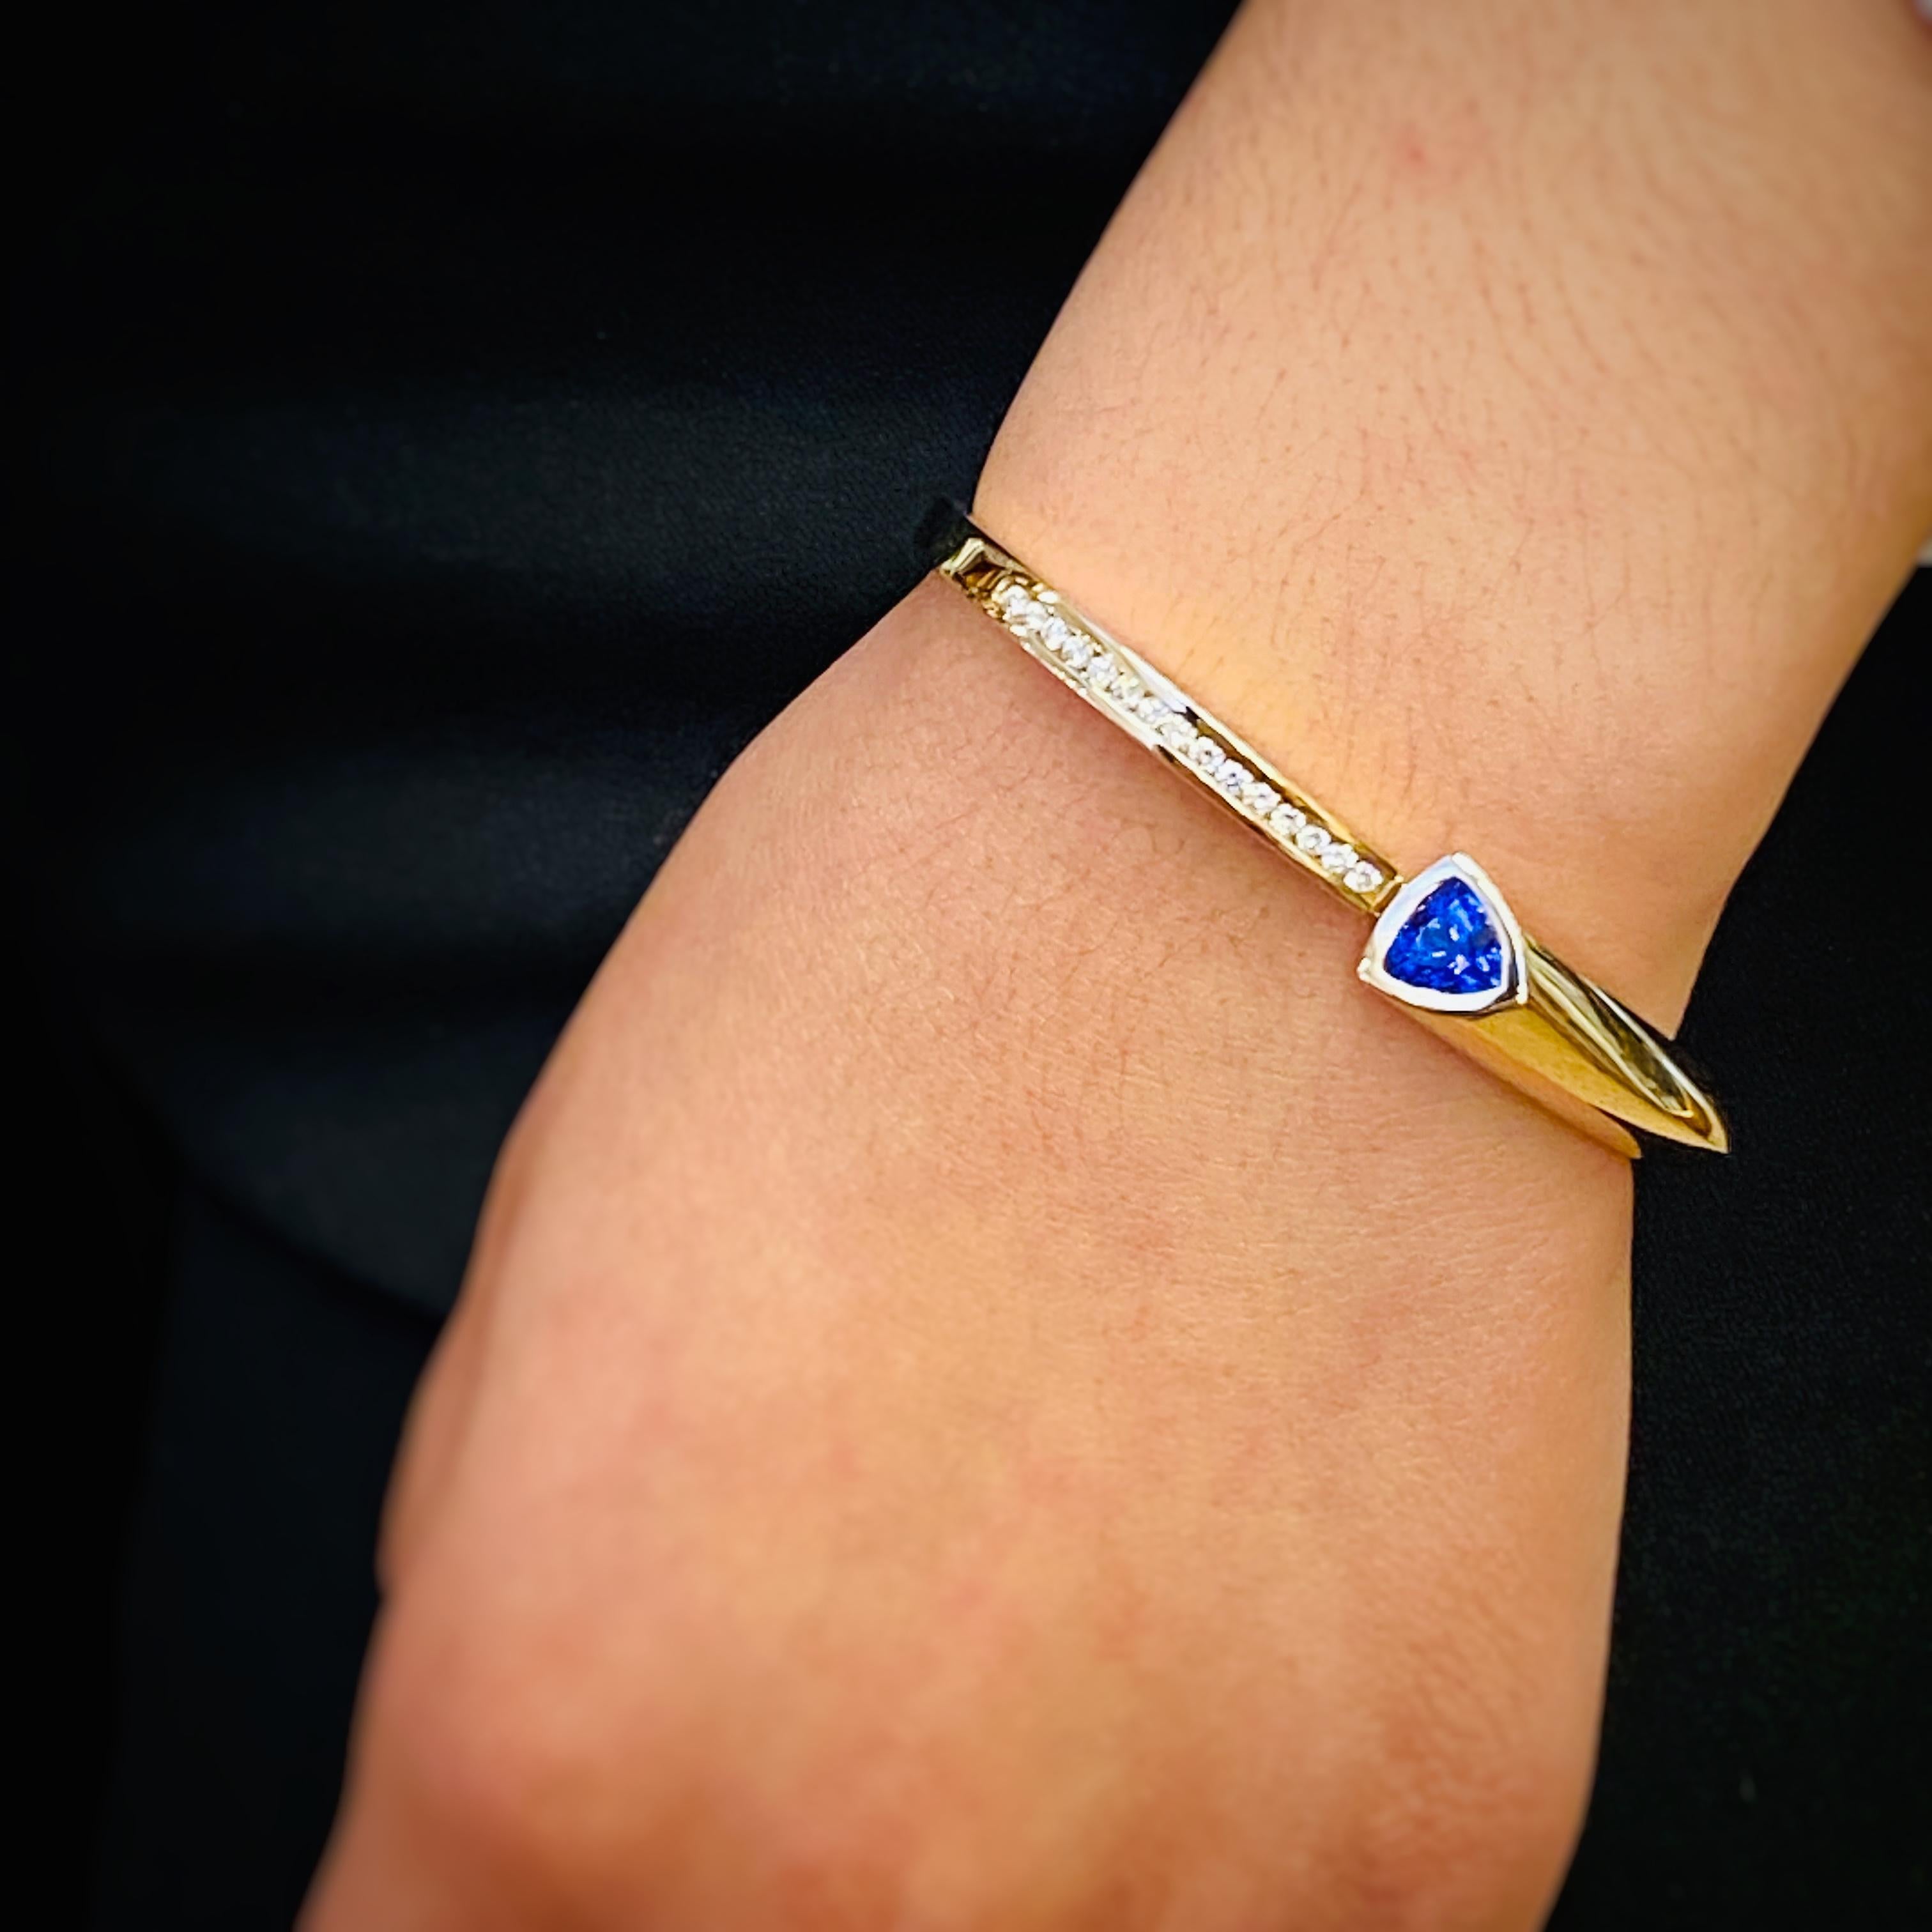 A single, trillion, beautifully colored Tanzanite is featured in this high polish, 14k gold bracelet by Cornelis Hollander.  Diamond pave accents the other side of this hinged bracelet.
New, never worn condition.
Tanzanite approximately 2